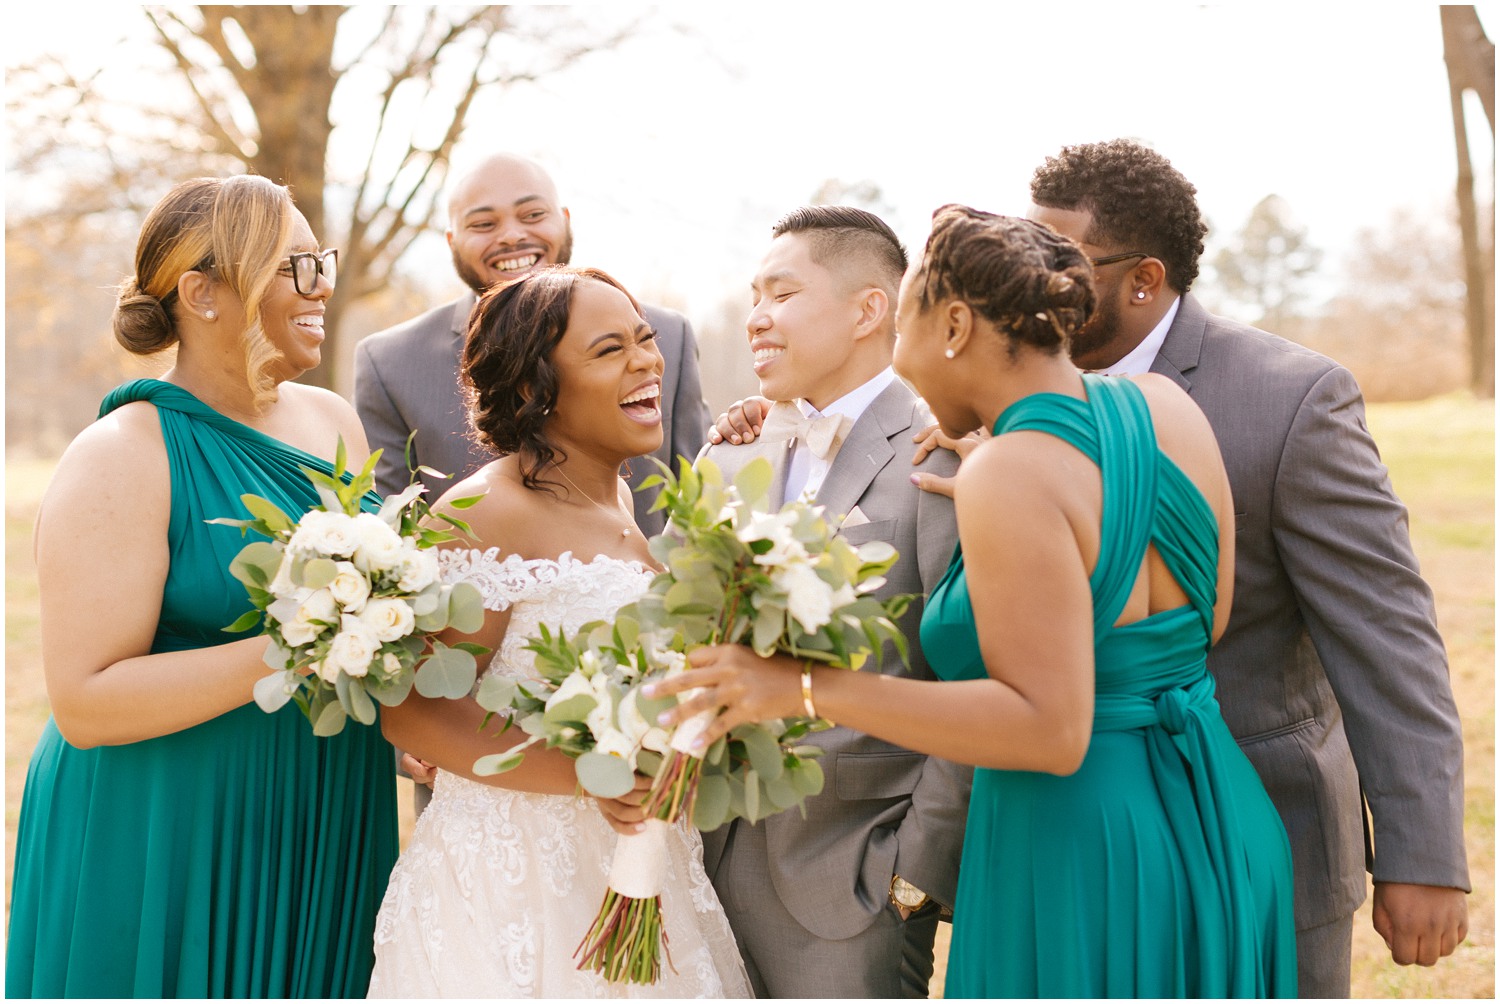 Wedding Party laughing together photographed by NC Wedding Photographer Chelsea Renay